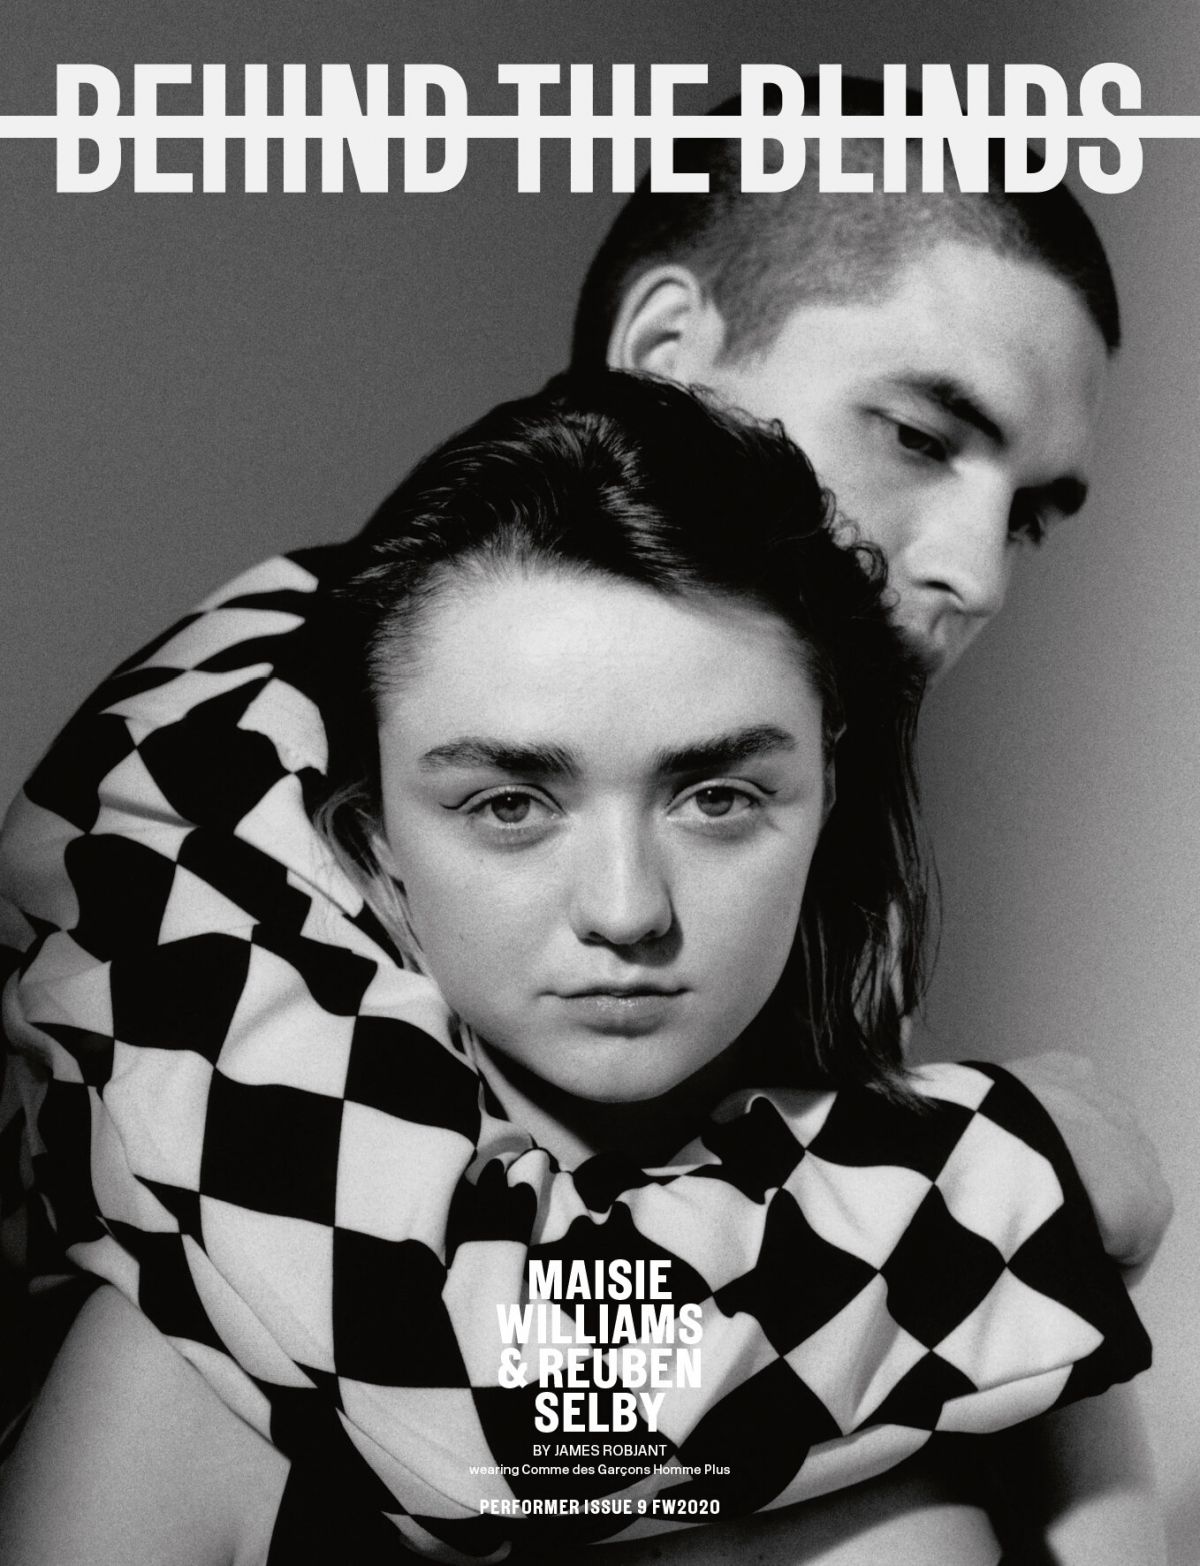 maisie-williams-on-the-cover-of-behind-the-blinds-issue-09-fall-winter-2020-0.jpg